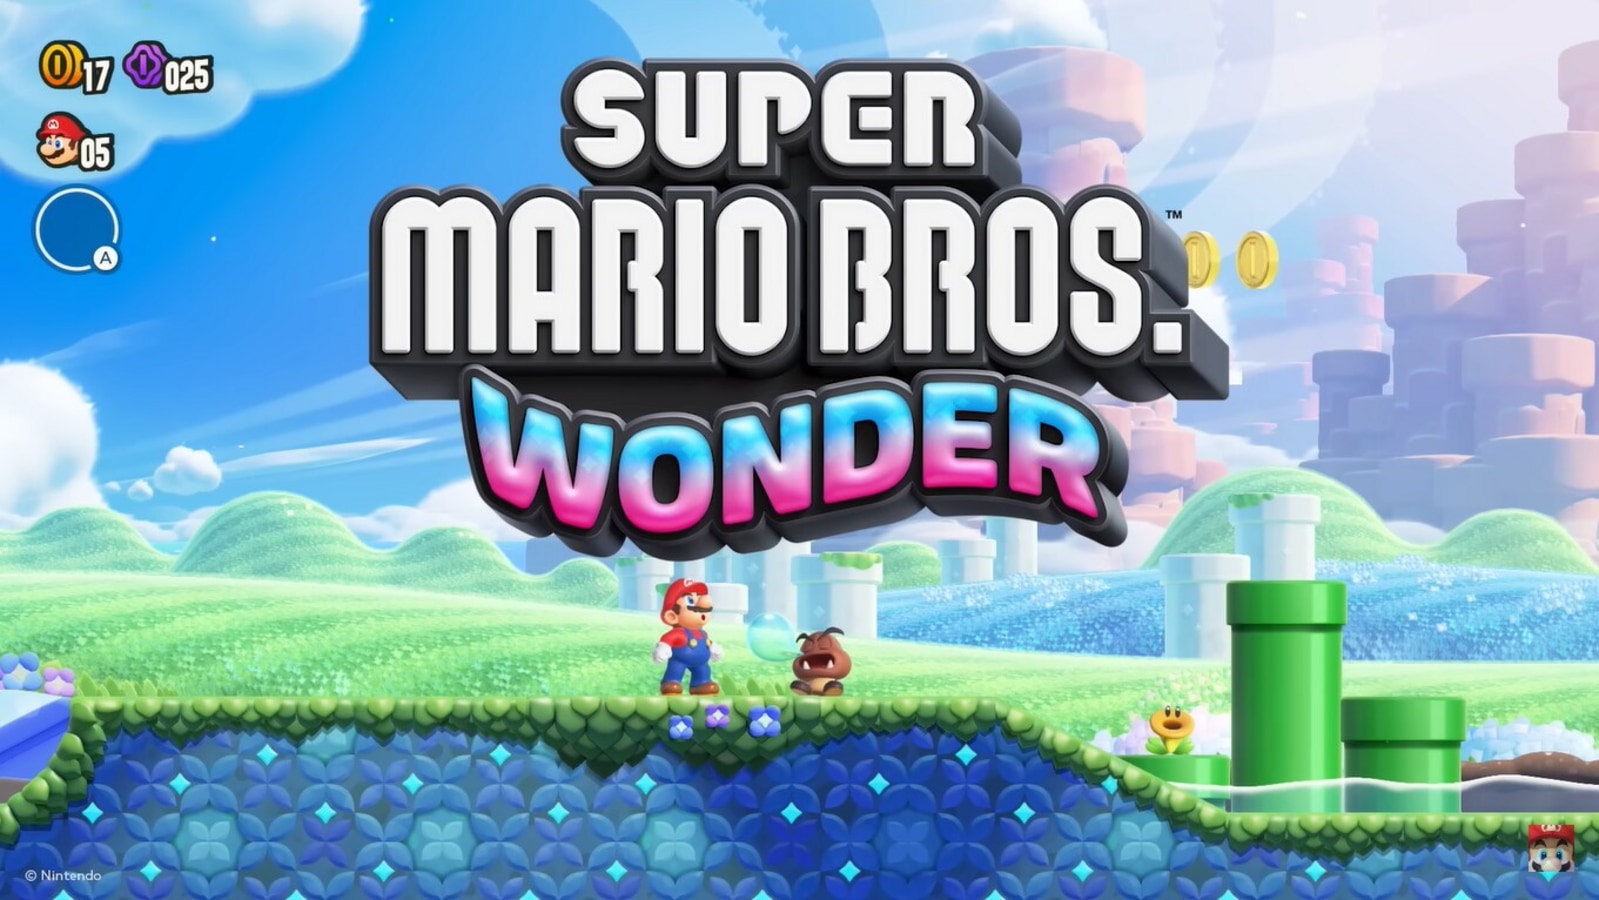 Super Mario Bros. Wonder Know all about it Release date, gameplay